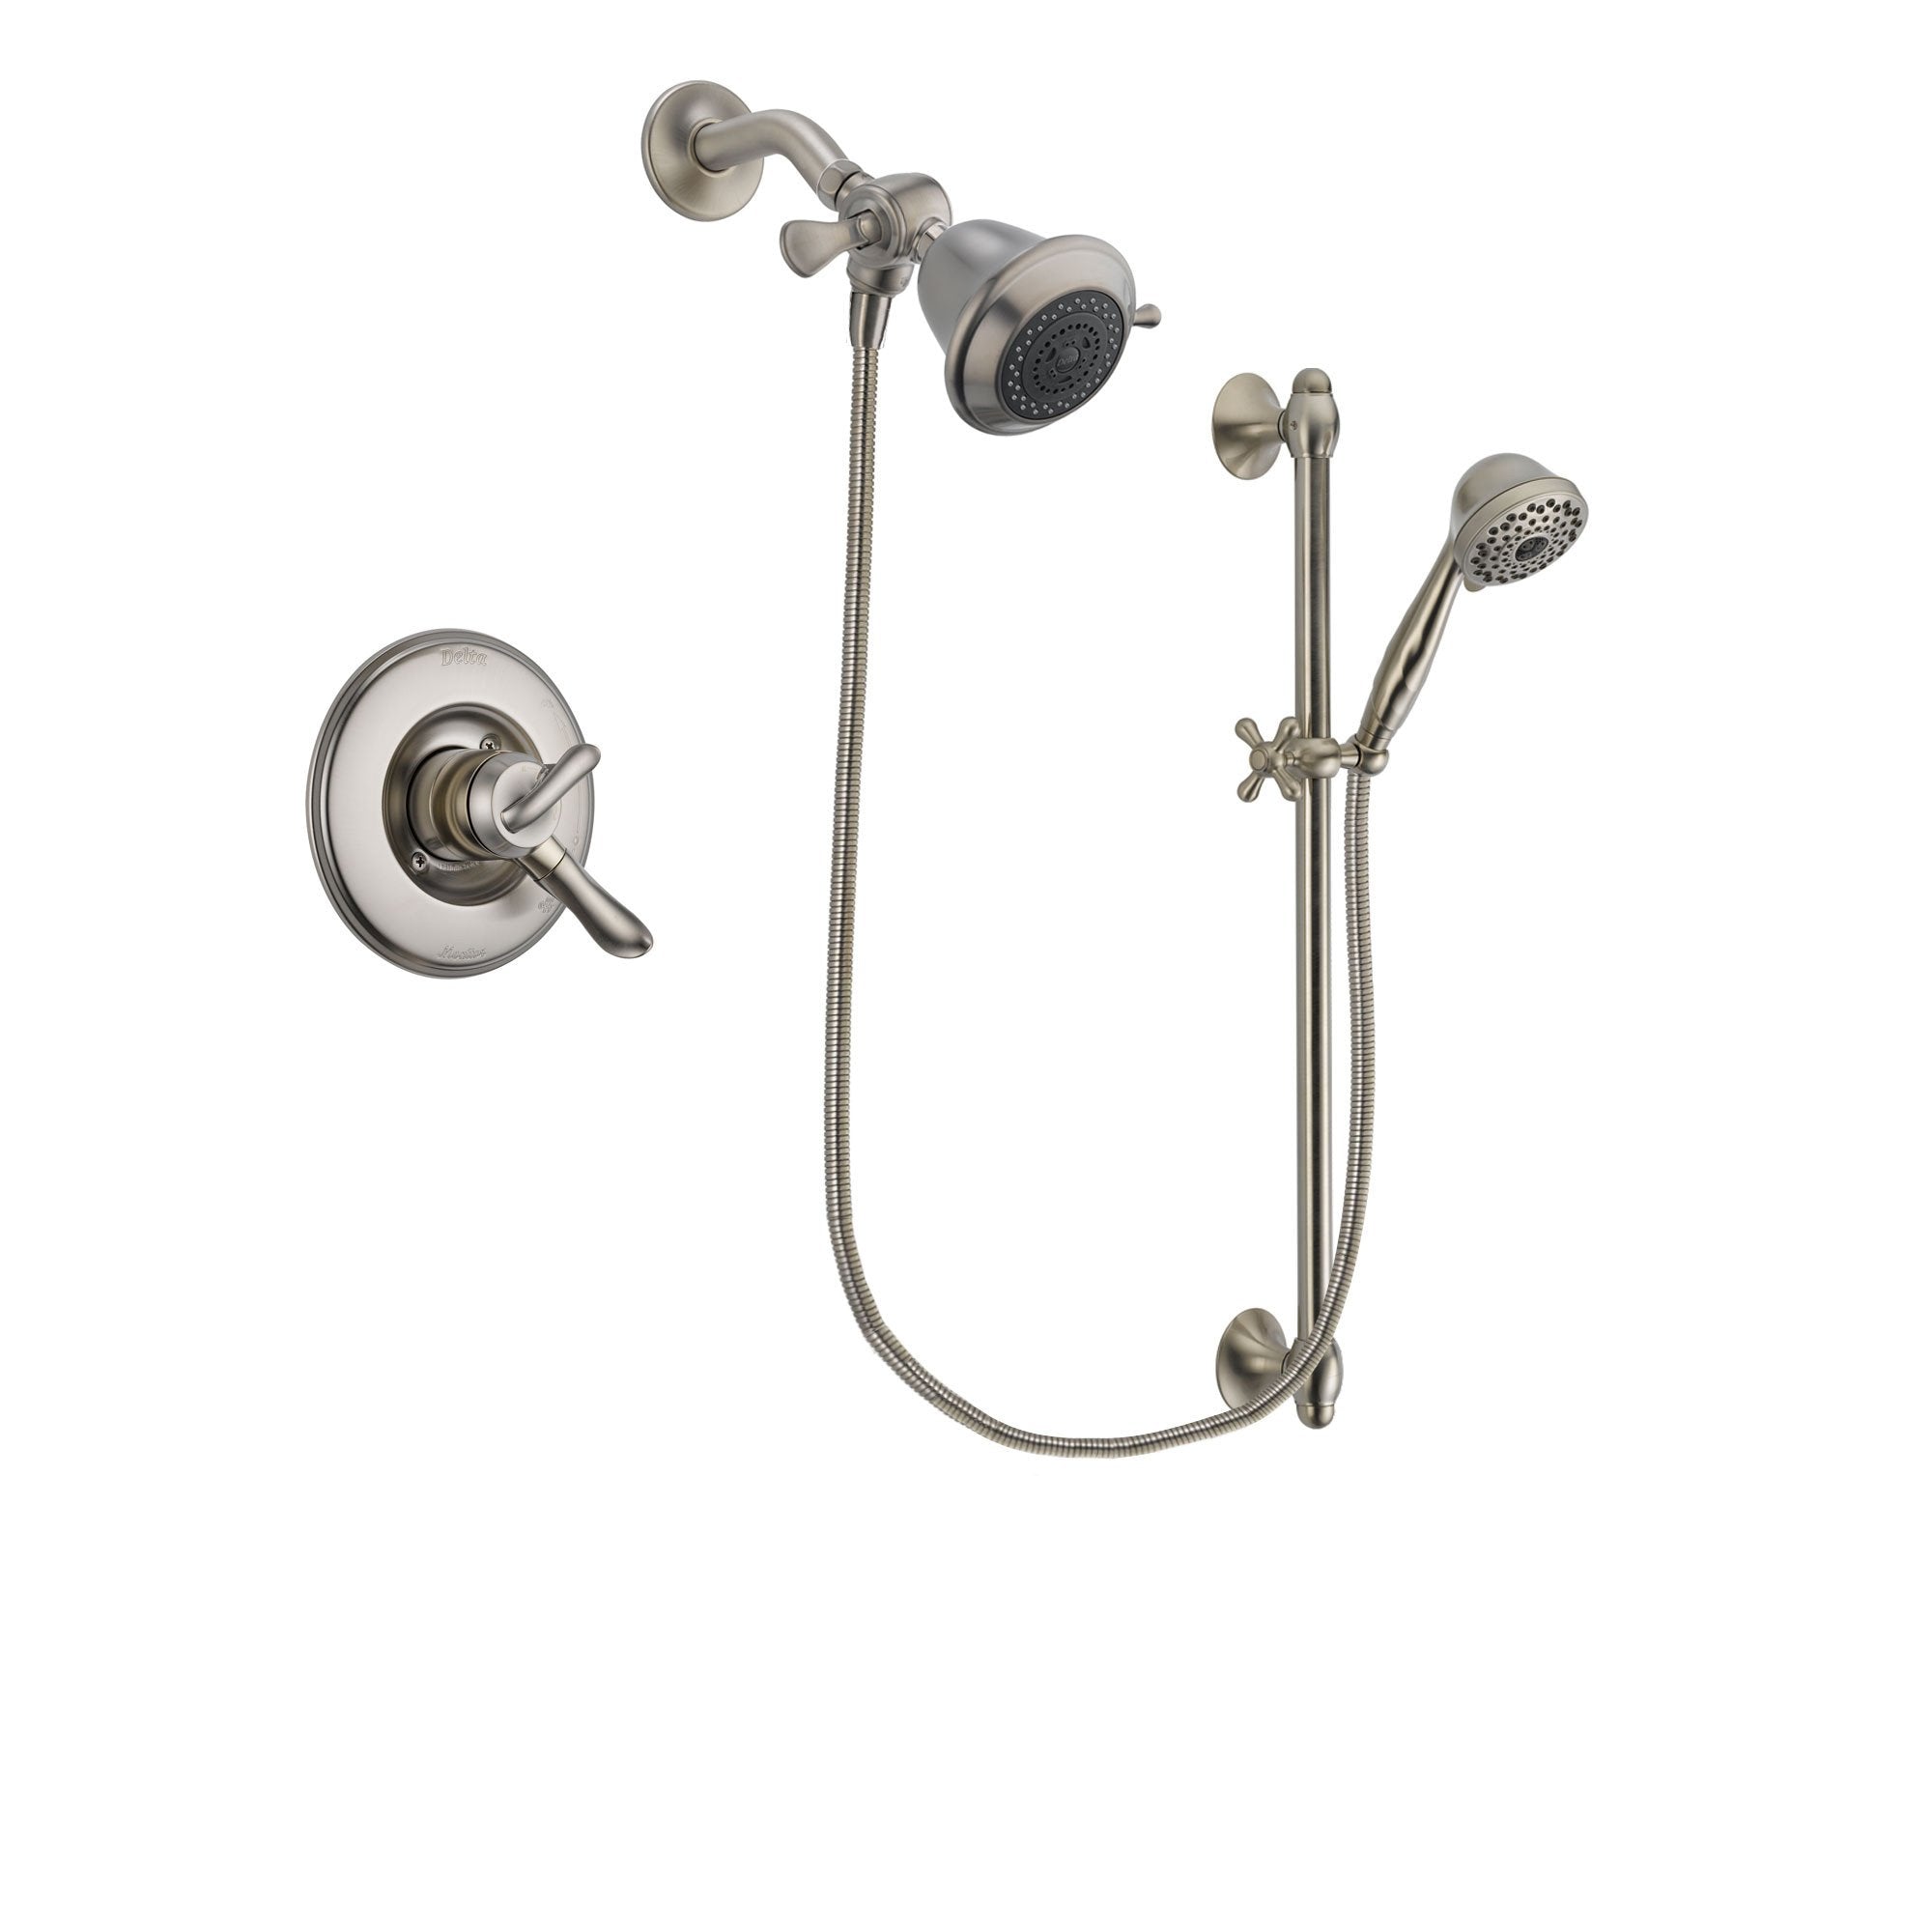 Delta Linden Stainless Steel Finish Dual Control Shower Faucet System Package with Shower Head and 7-Spray Handheld Shower with Slide Bar Includes Rough-in Valve DSP1680V